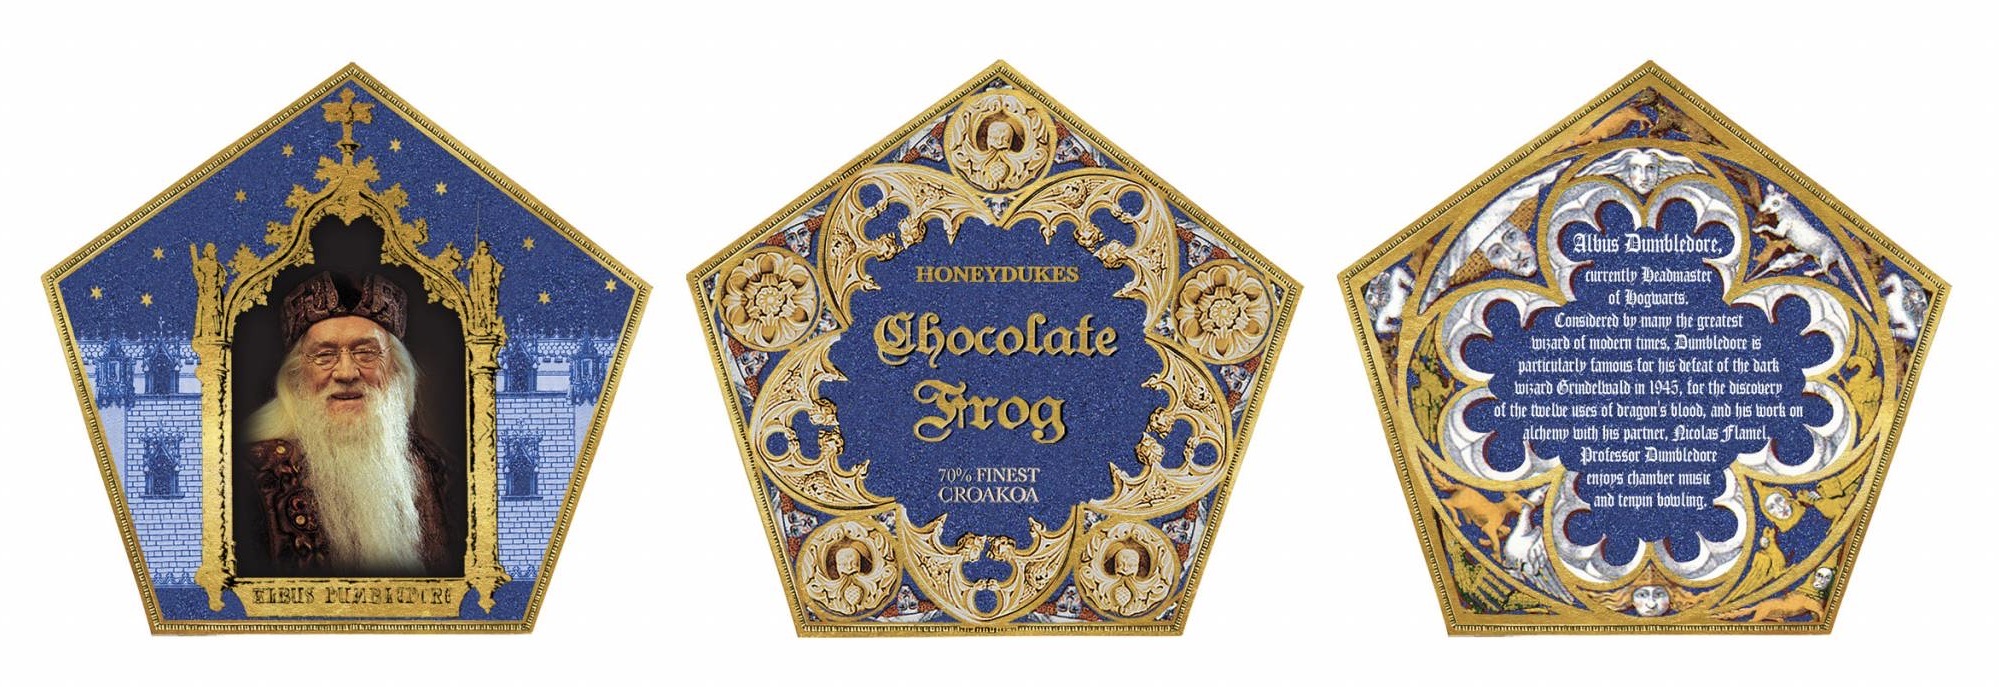 Details about   Harry Potter Chocolate Frog Wizard Card Jocunda Sykes 